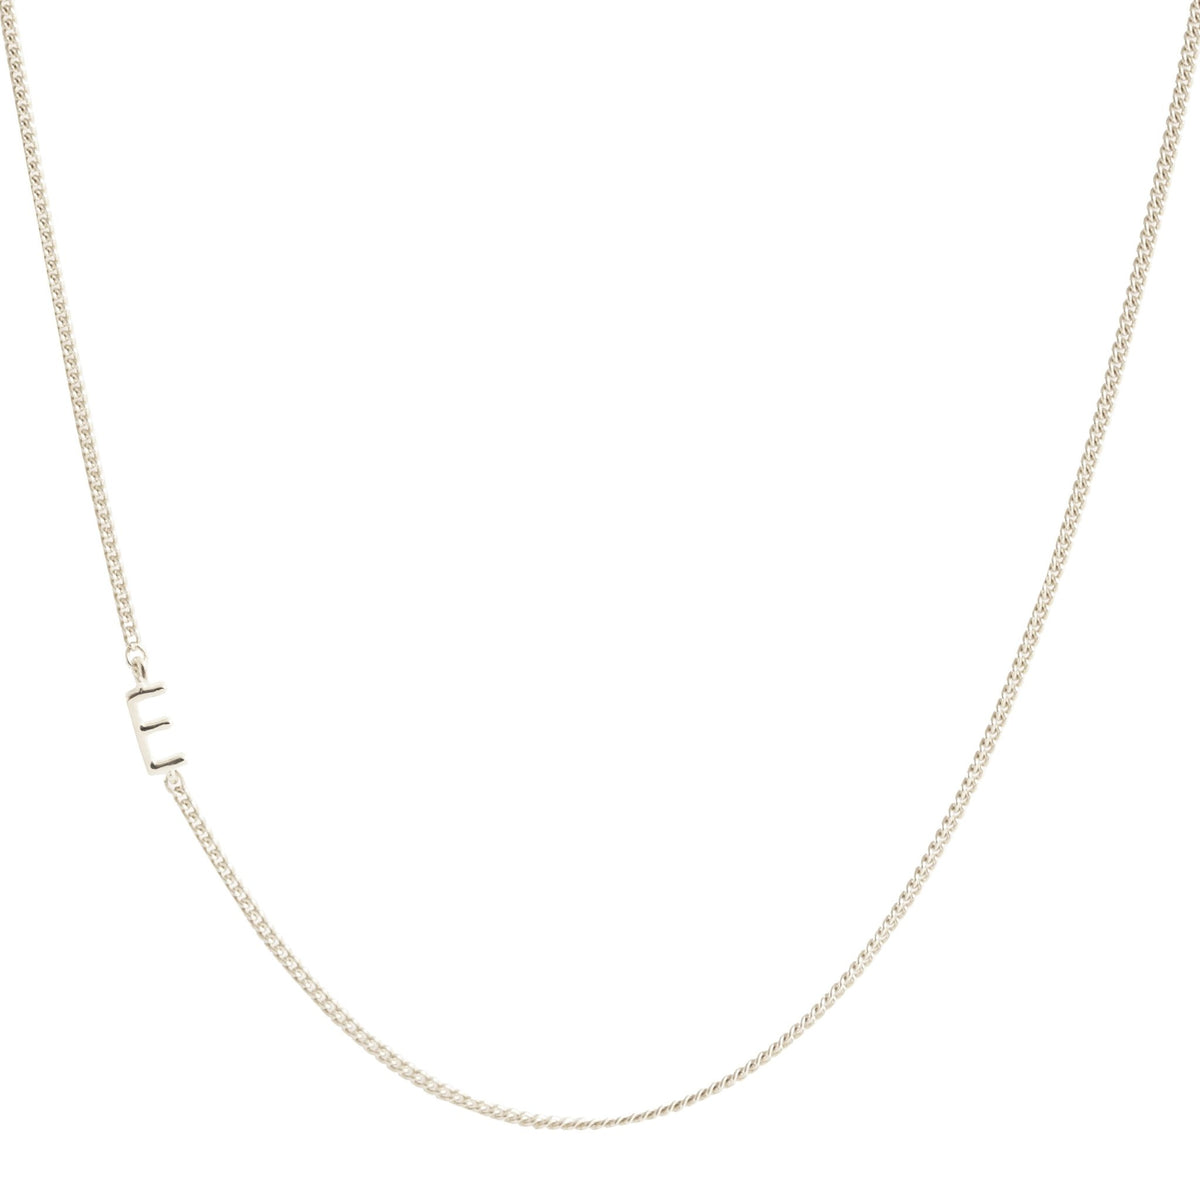 NOTABLE OFFSET INITIAL NECKLACE - E - GOLD, ROSE GOLD, OR SILVER - SO PRETTY CARA COTTER